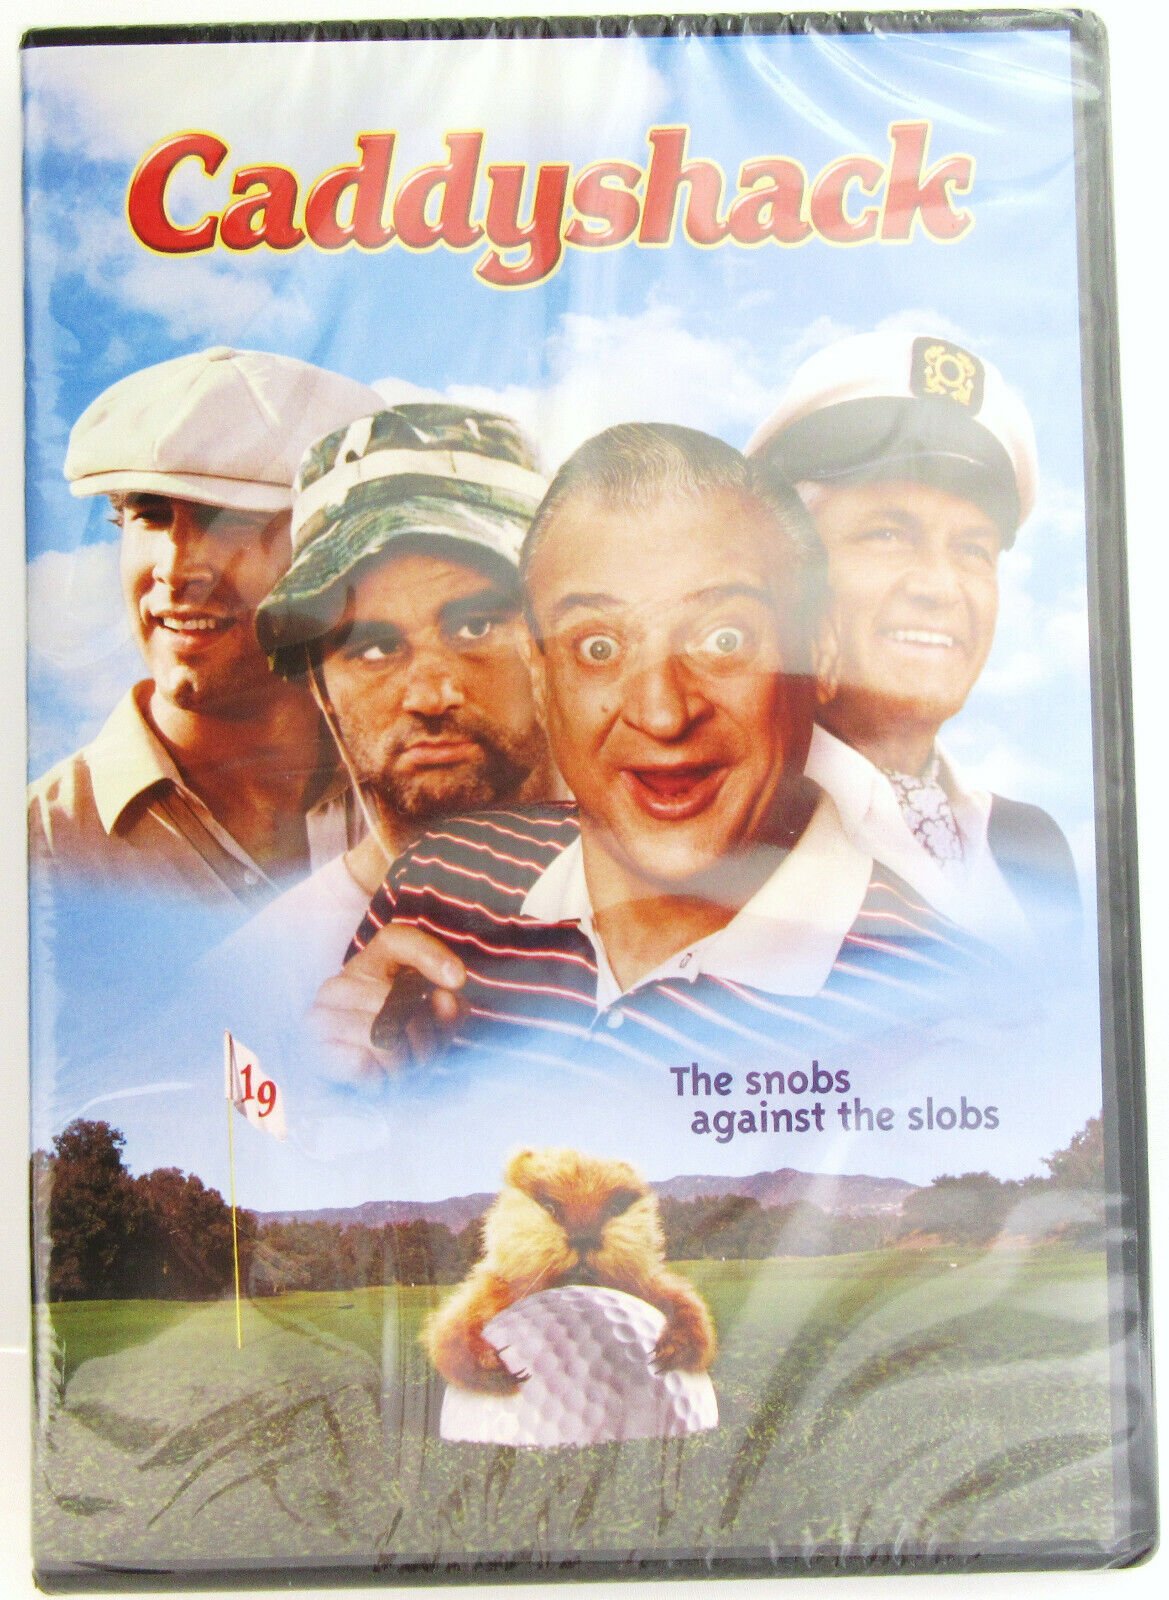 Caddyshack ~ Chevy Chase, Bill Murray, Ted Knight ~ 1980 ~ Movie ~ New DVD